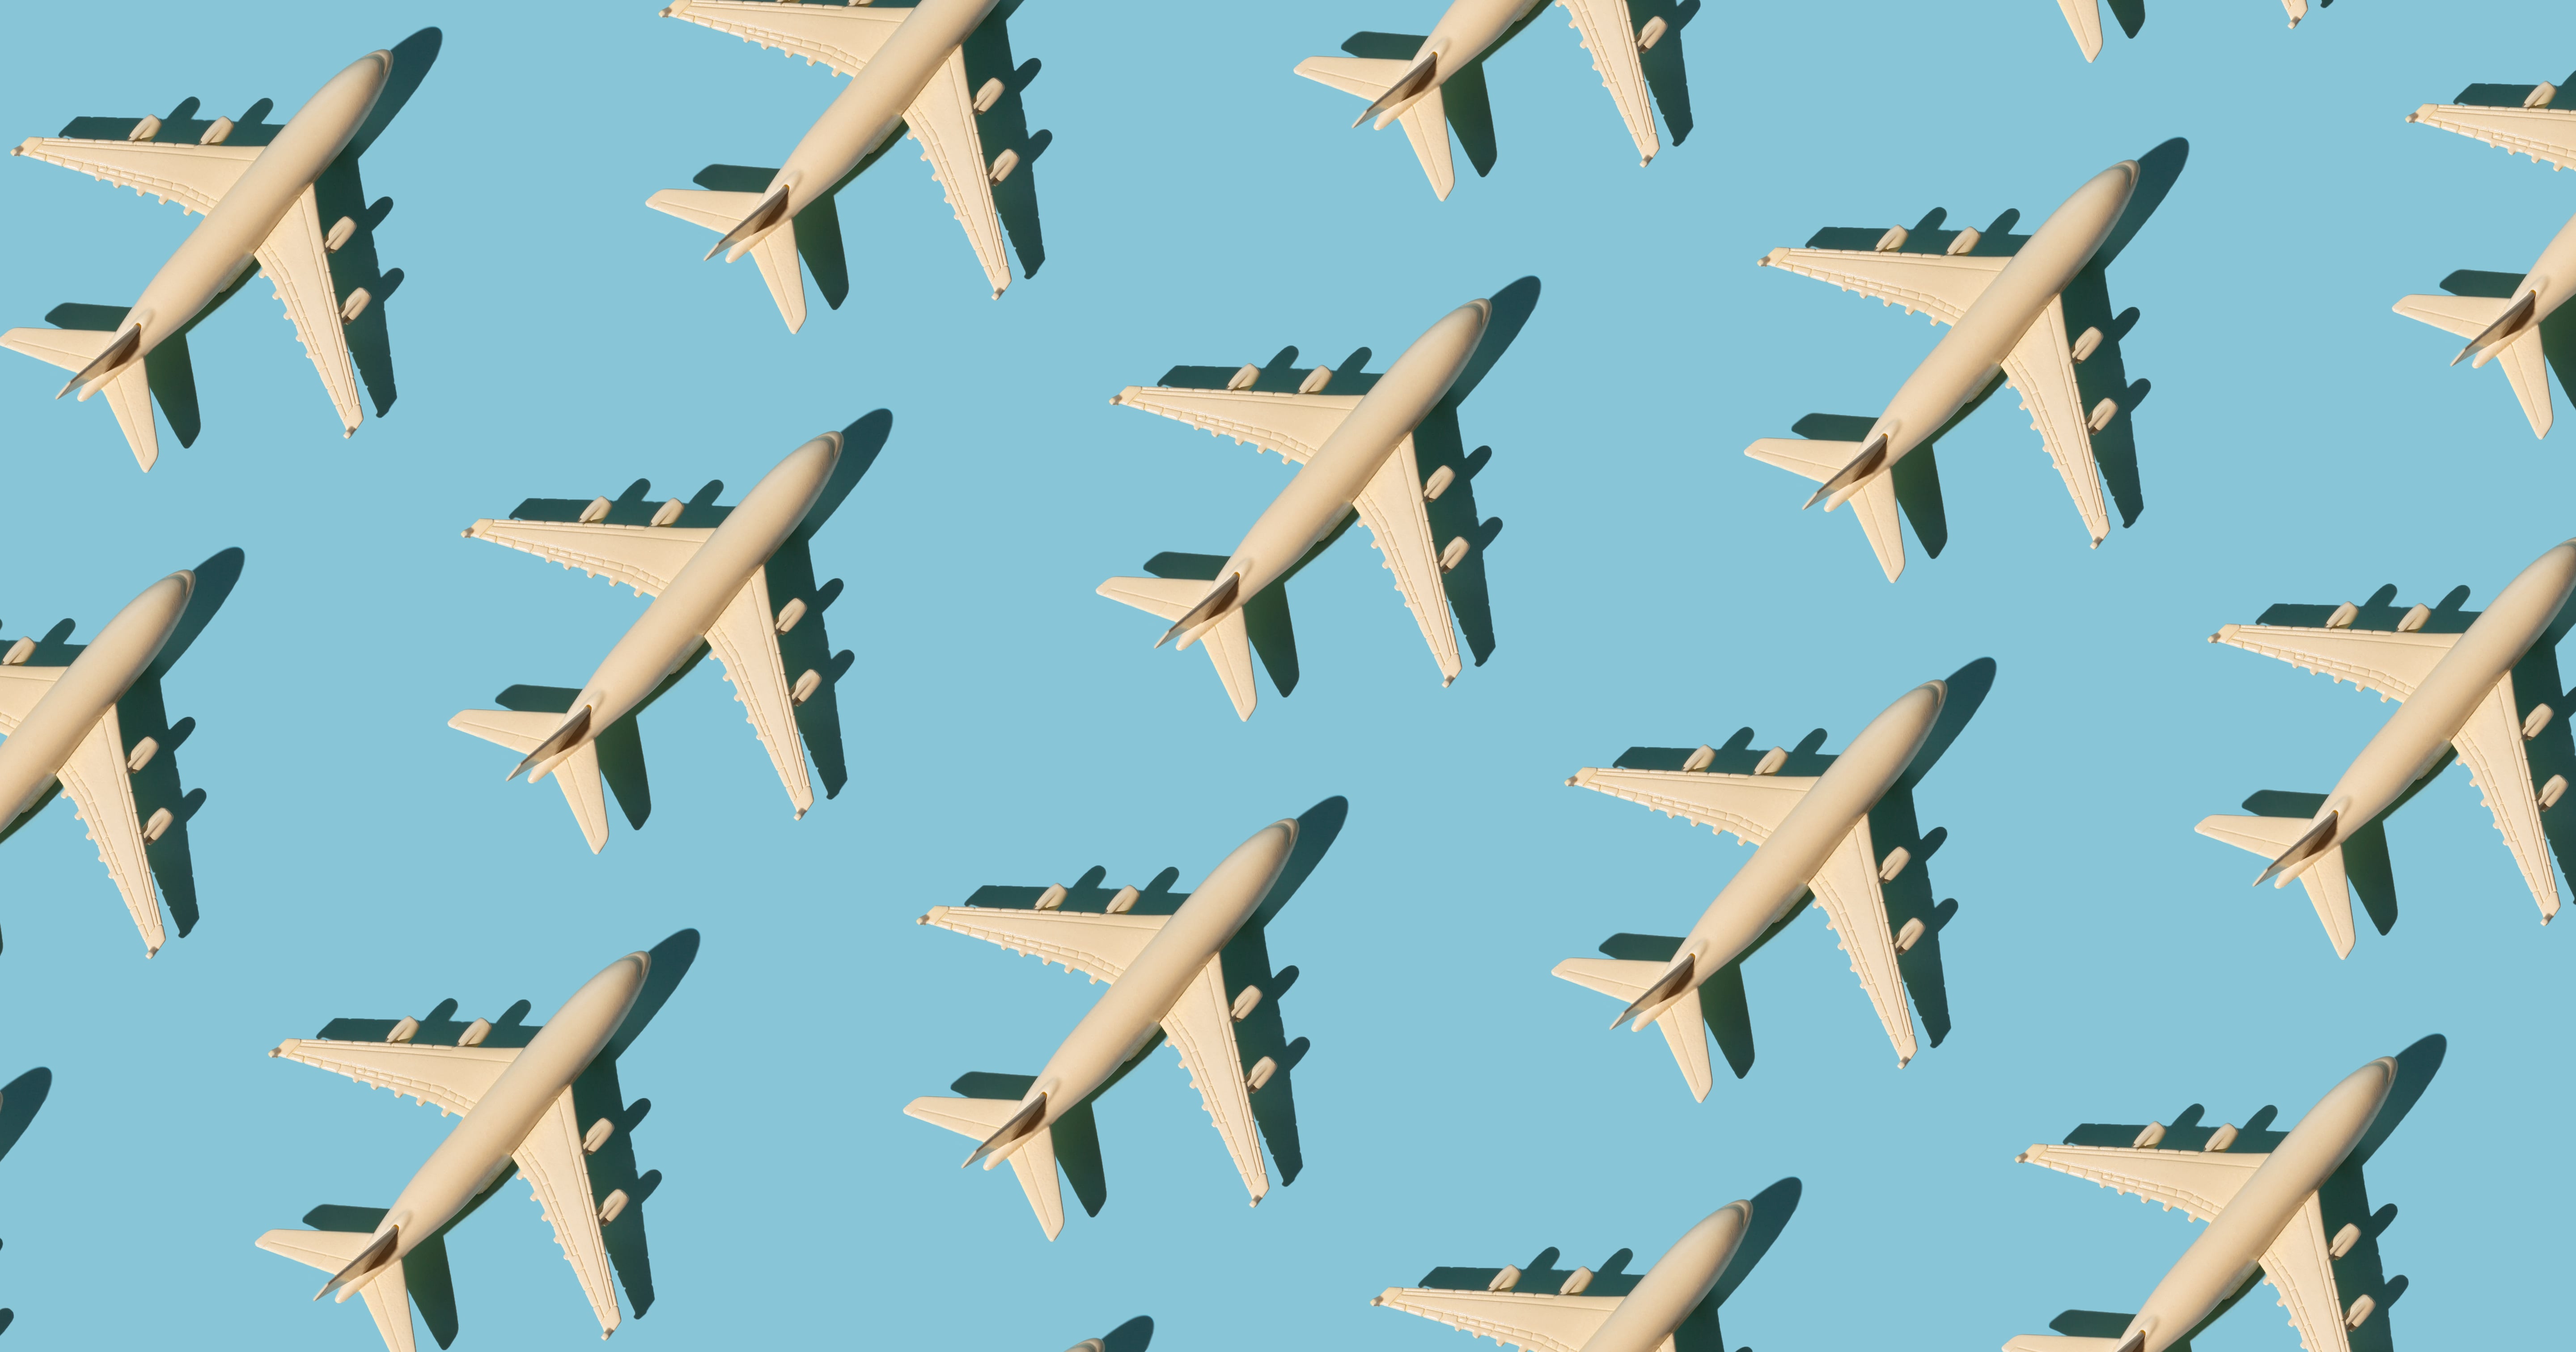 Can We Not With the In-Flight Skin-Care Routines?